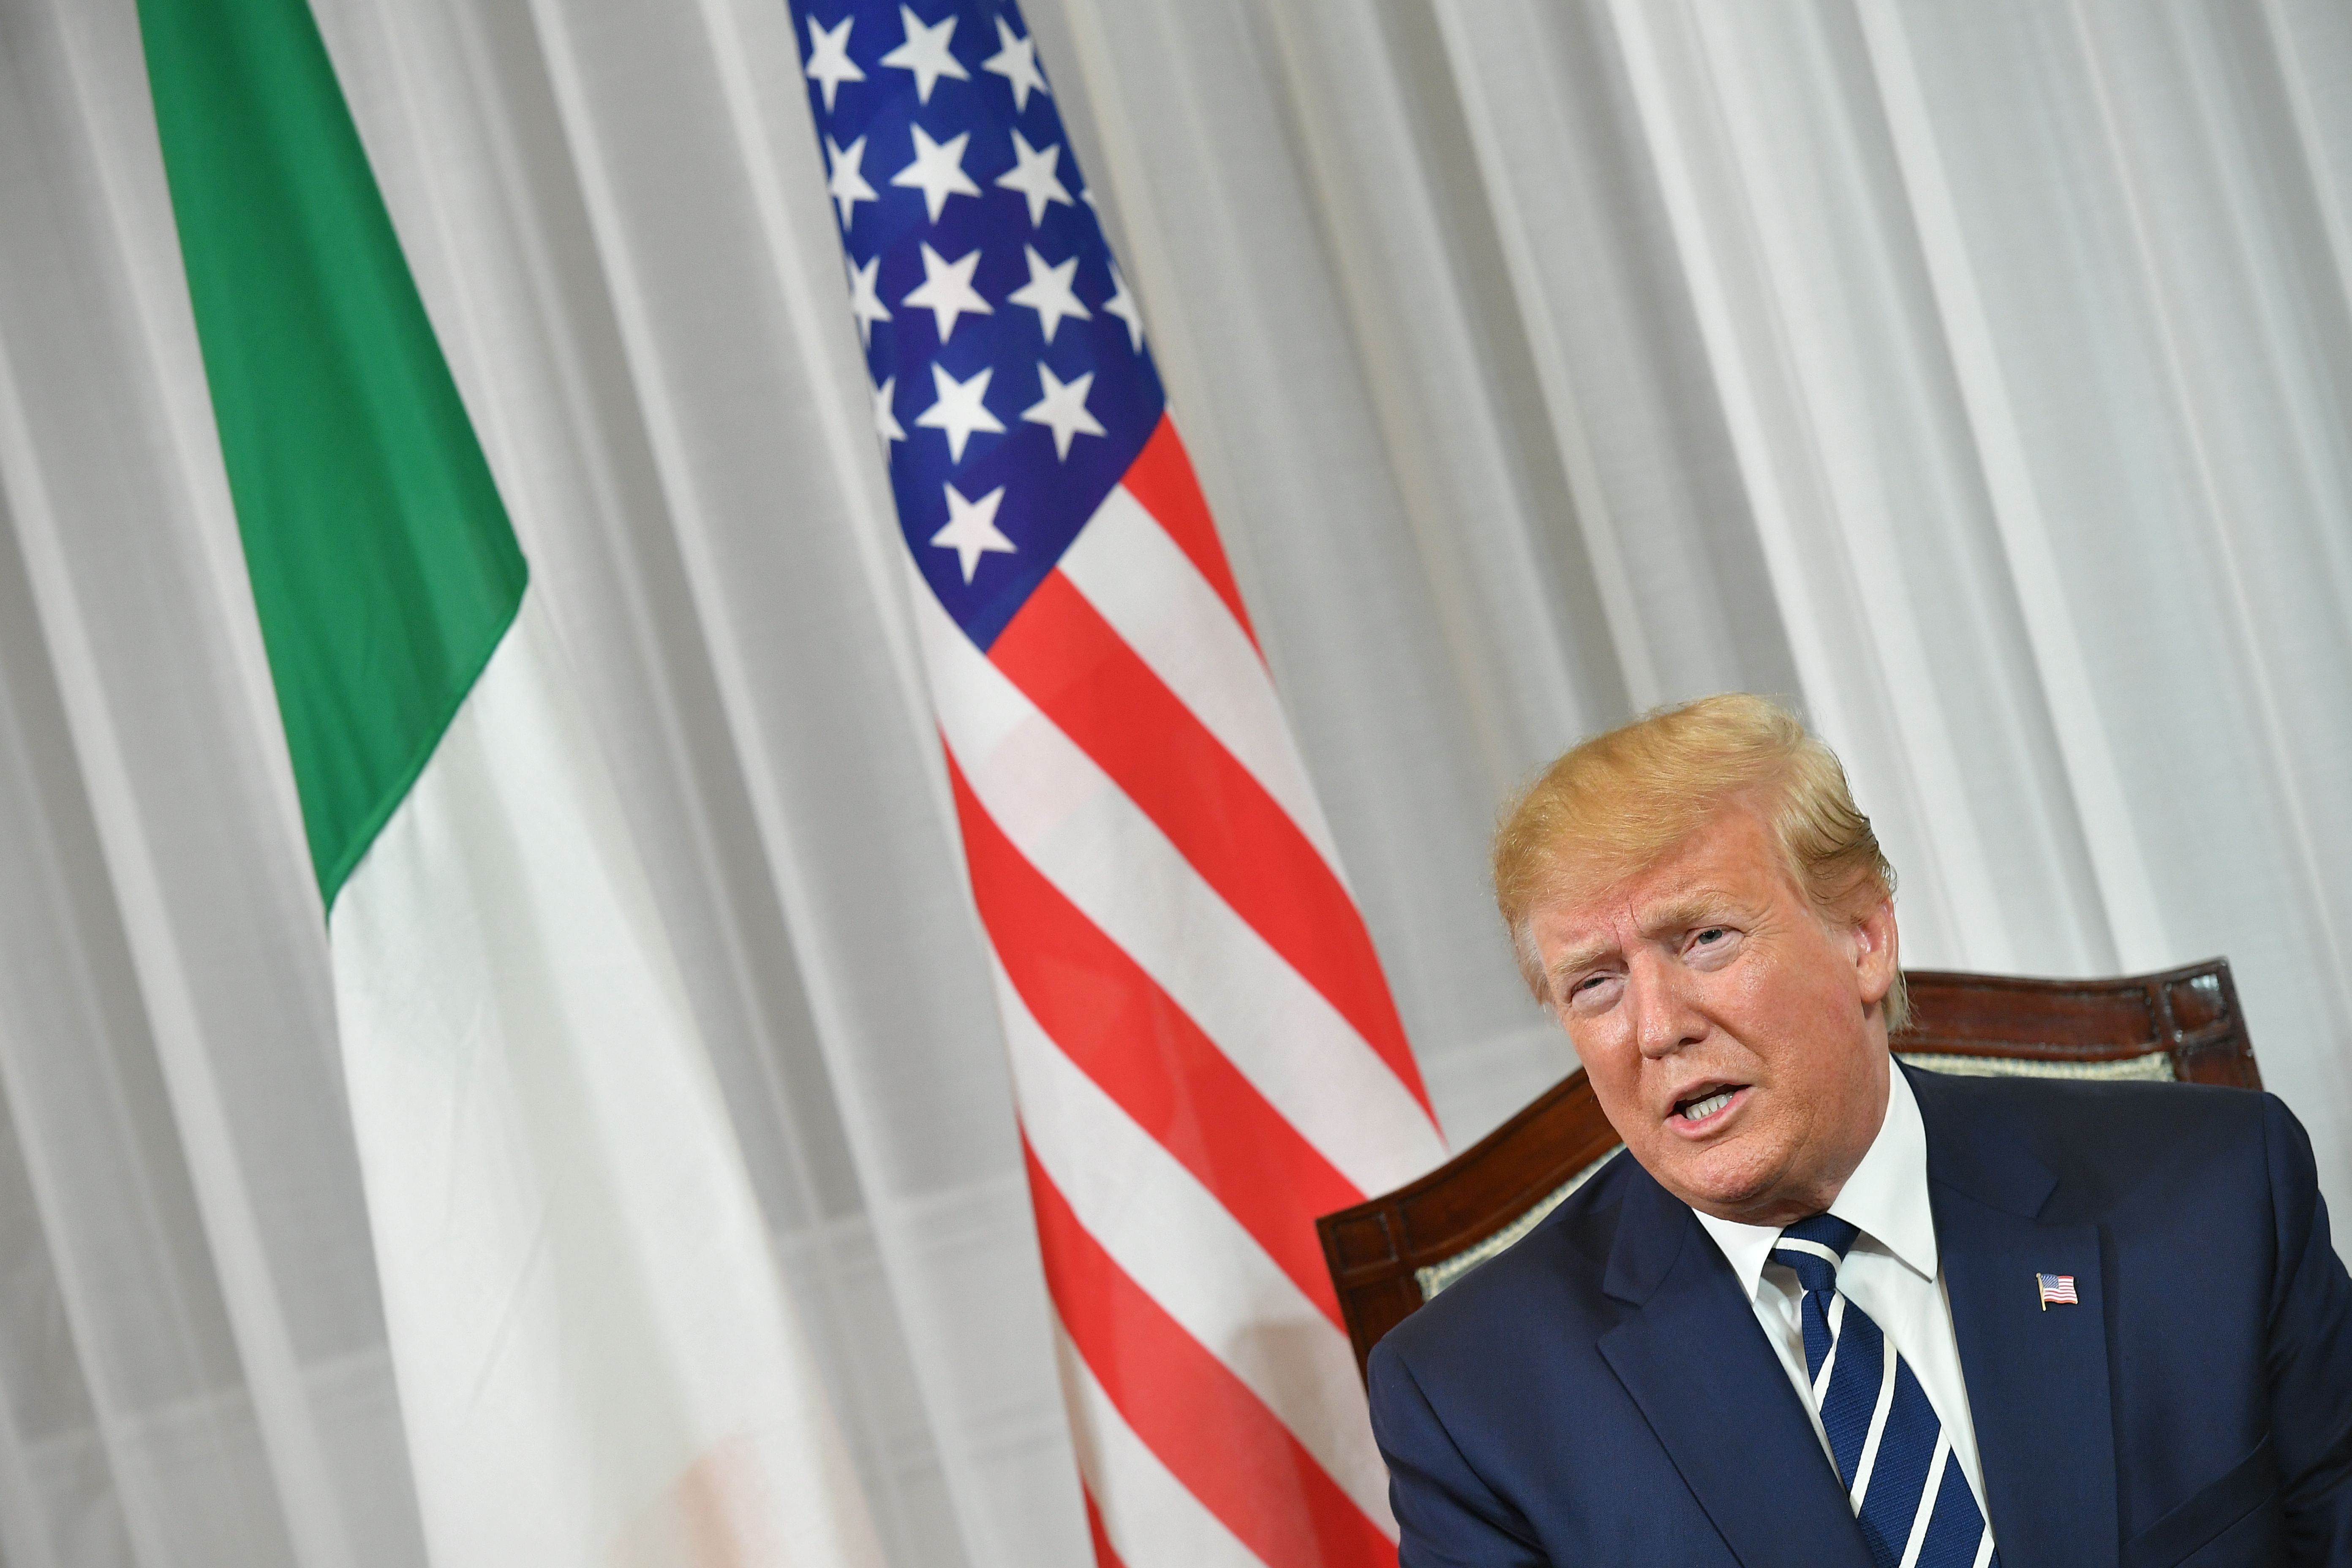 President Trump is seen during his meeting with Irish Prime Minister Leo Varadkar at Shannon Airport in Shannon, Ireland on June 5, 2019.